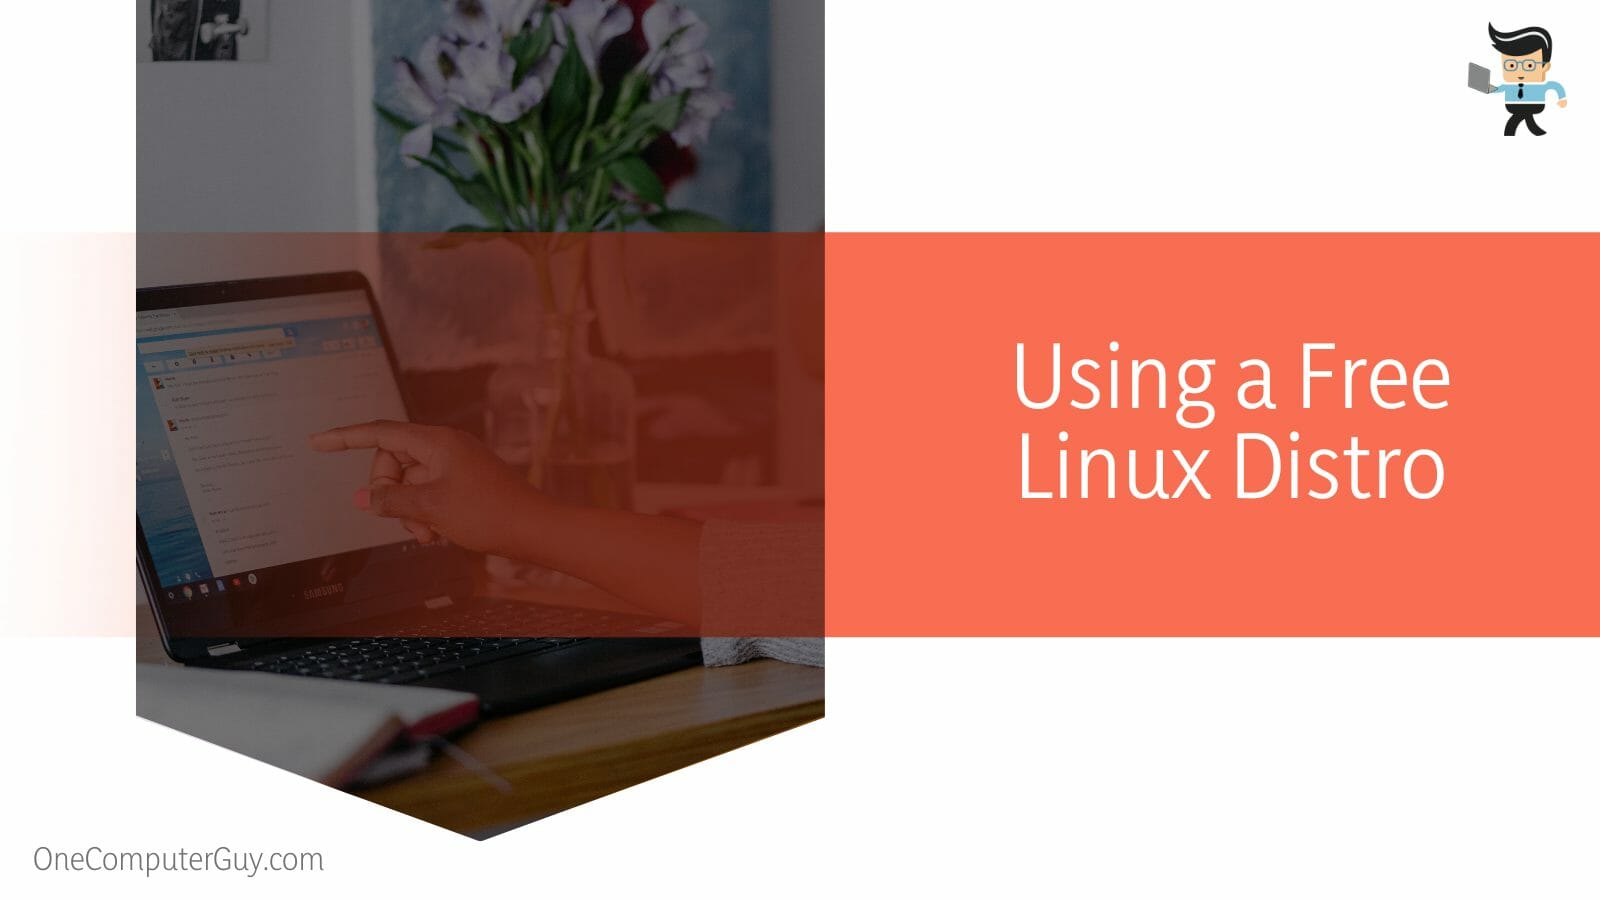 Using a Free Linux Distro